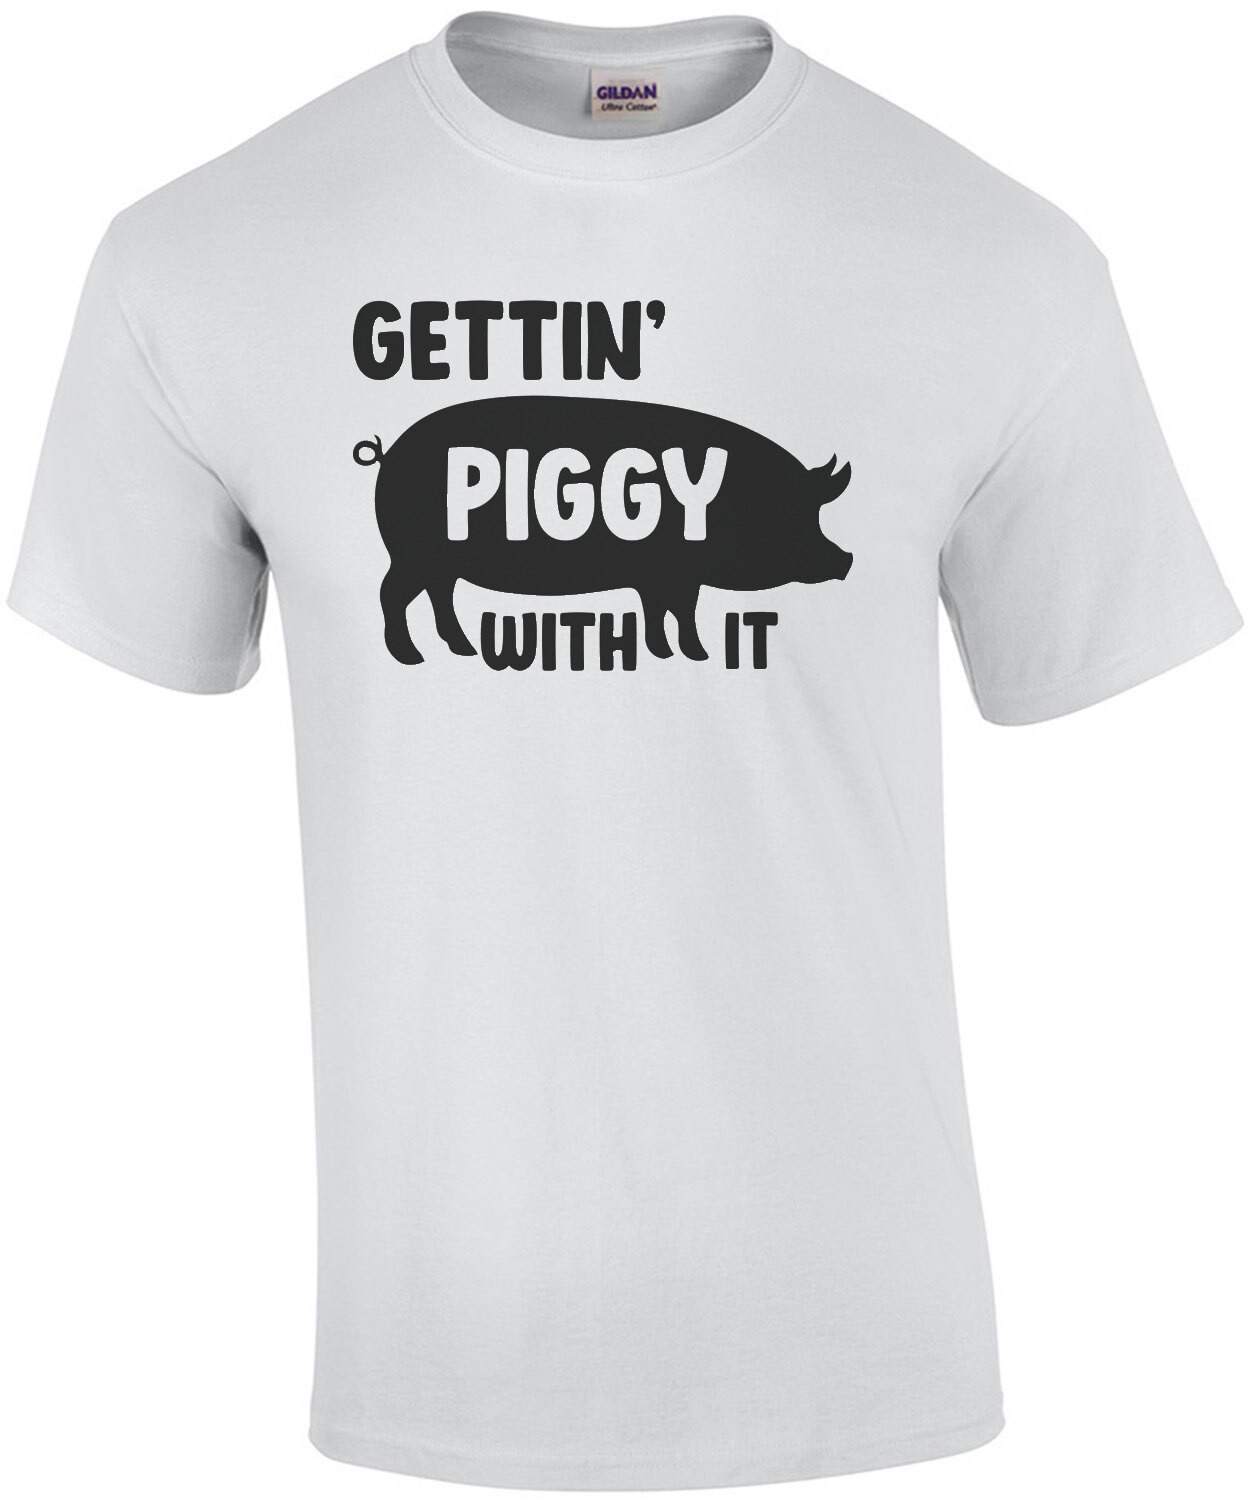 Gettin'd piggy with it - funny bacon t-shirt